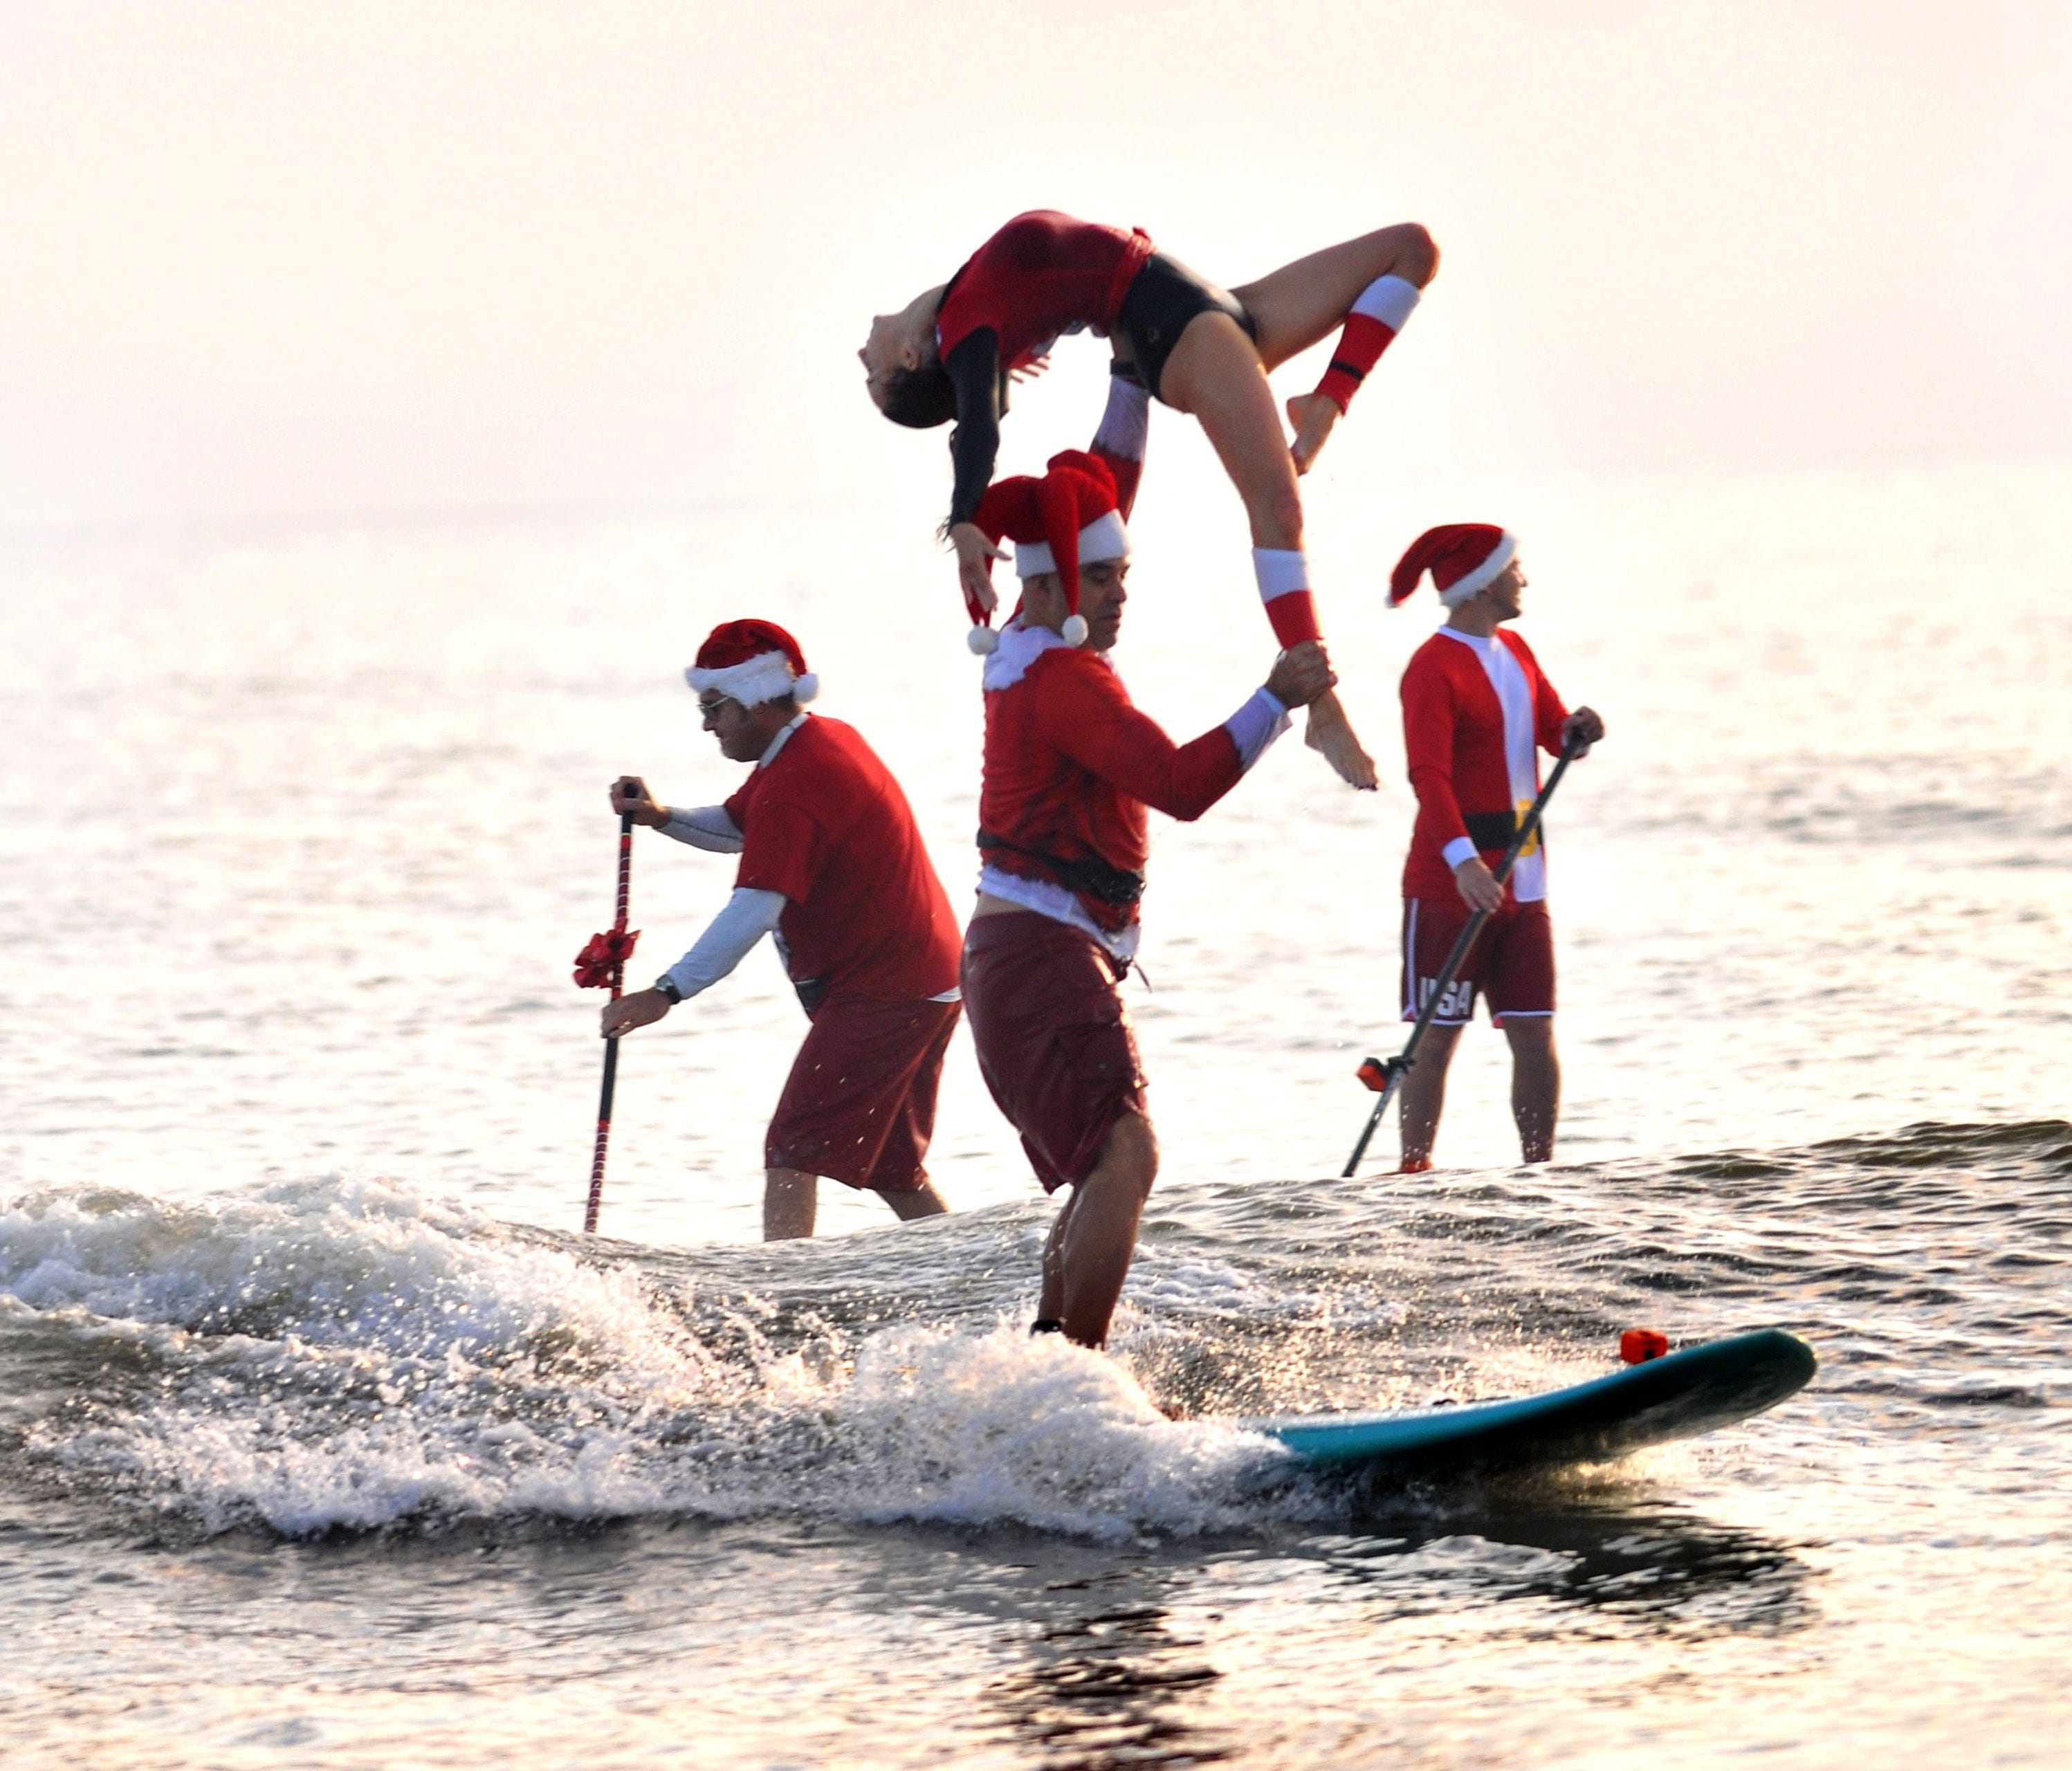 Ed and Kymmie Martinez of Cocoa Beach, Fla., do some tandem sufing Dec. 24, 2017, surfing past two of the hundreds of Surfing Santas that had gathered at Cocoa Beach for the ninth year..